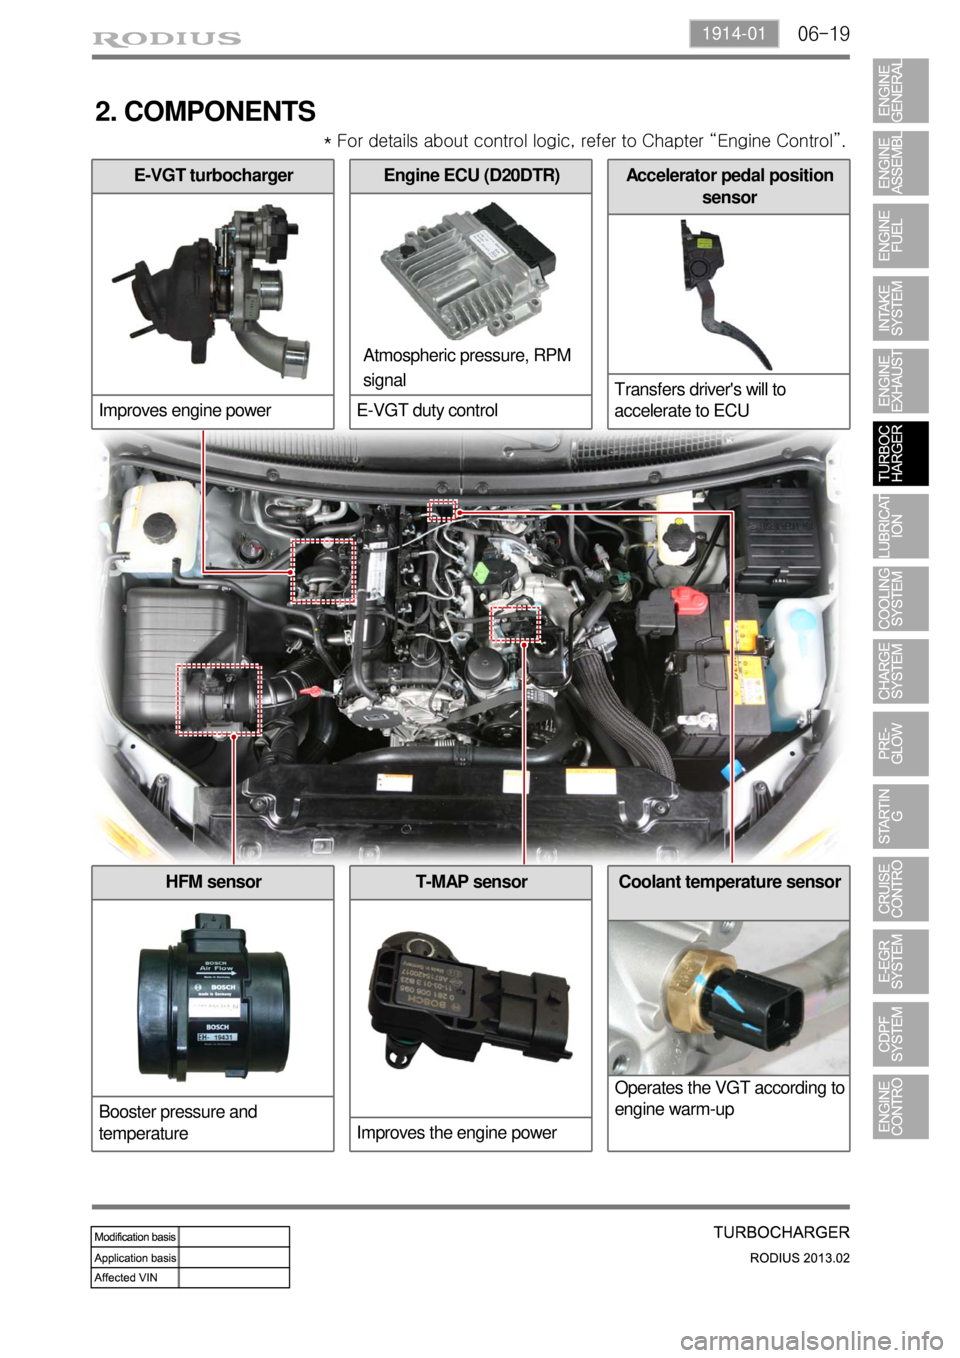 SSANGYONG TURISMO 2013  Service Manual 06-191914-01
2. COMPONENTS
Atmospheric pressure, RPM
signal * For details about control logic, refer to Chapter “Engine Control”.
E-VGT turbocharger
Improves engine powerAccelerator pedal position